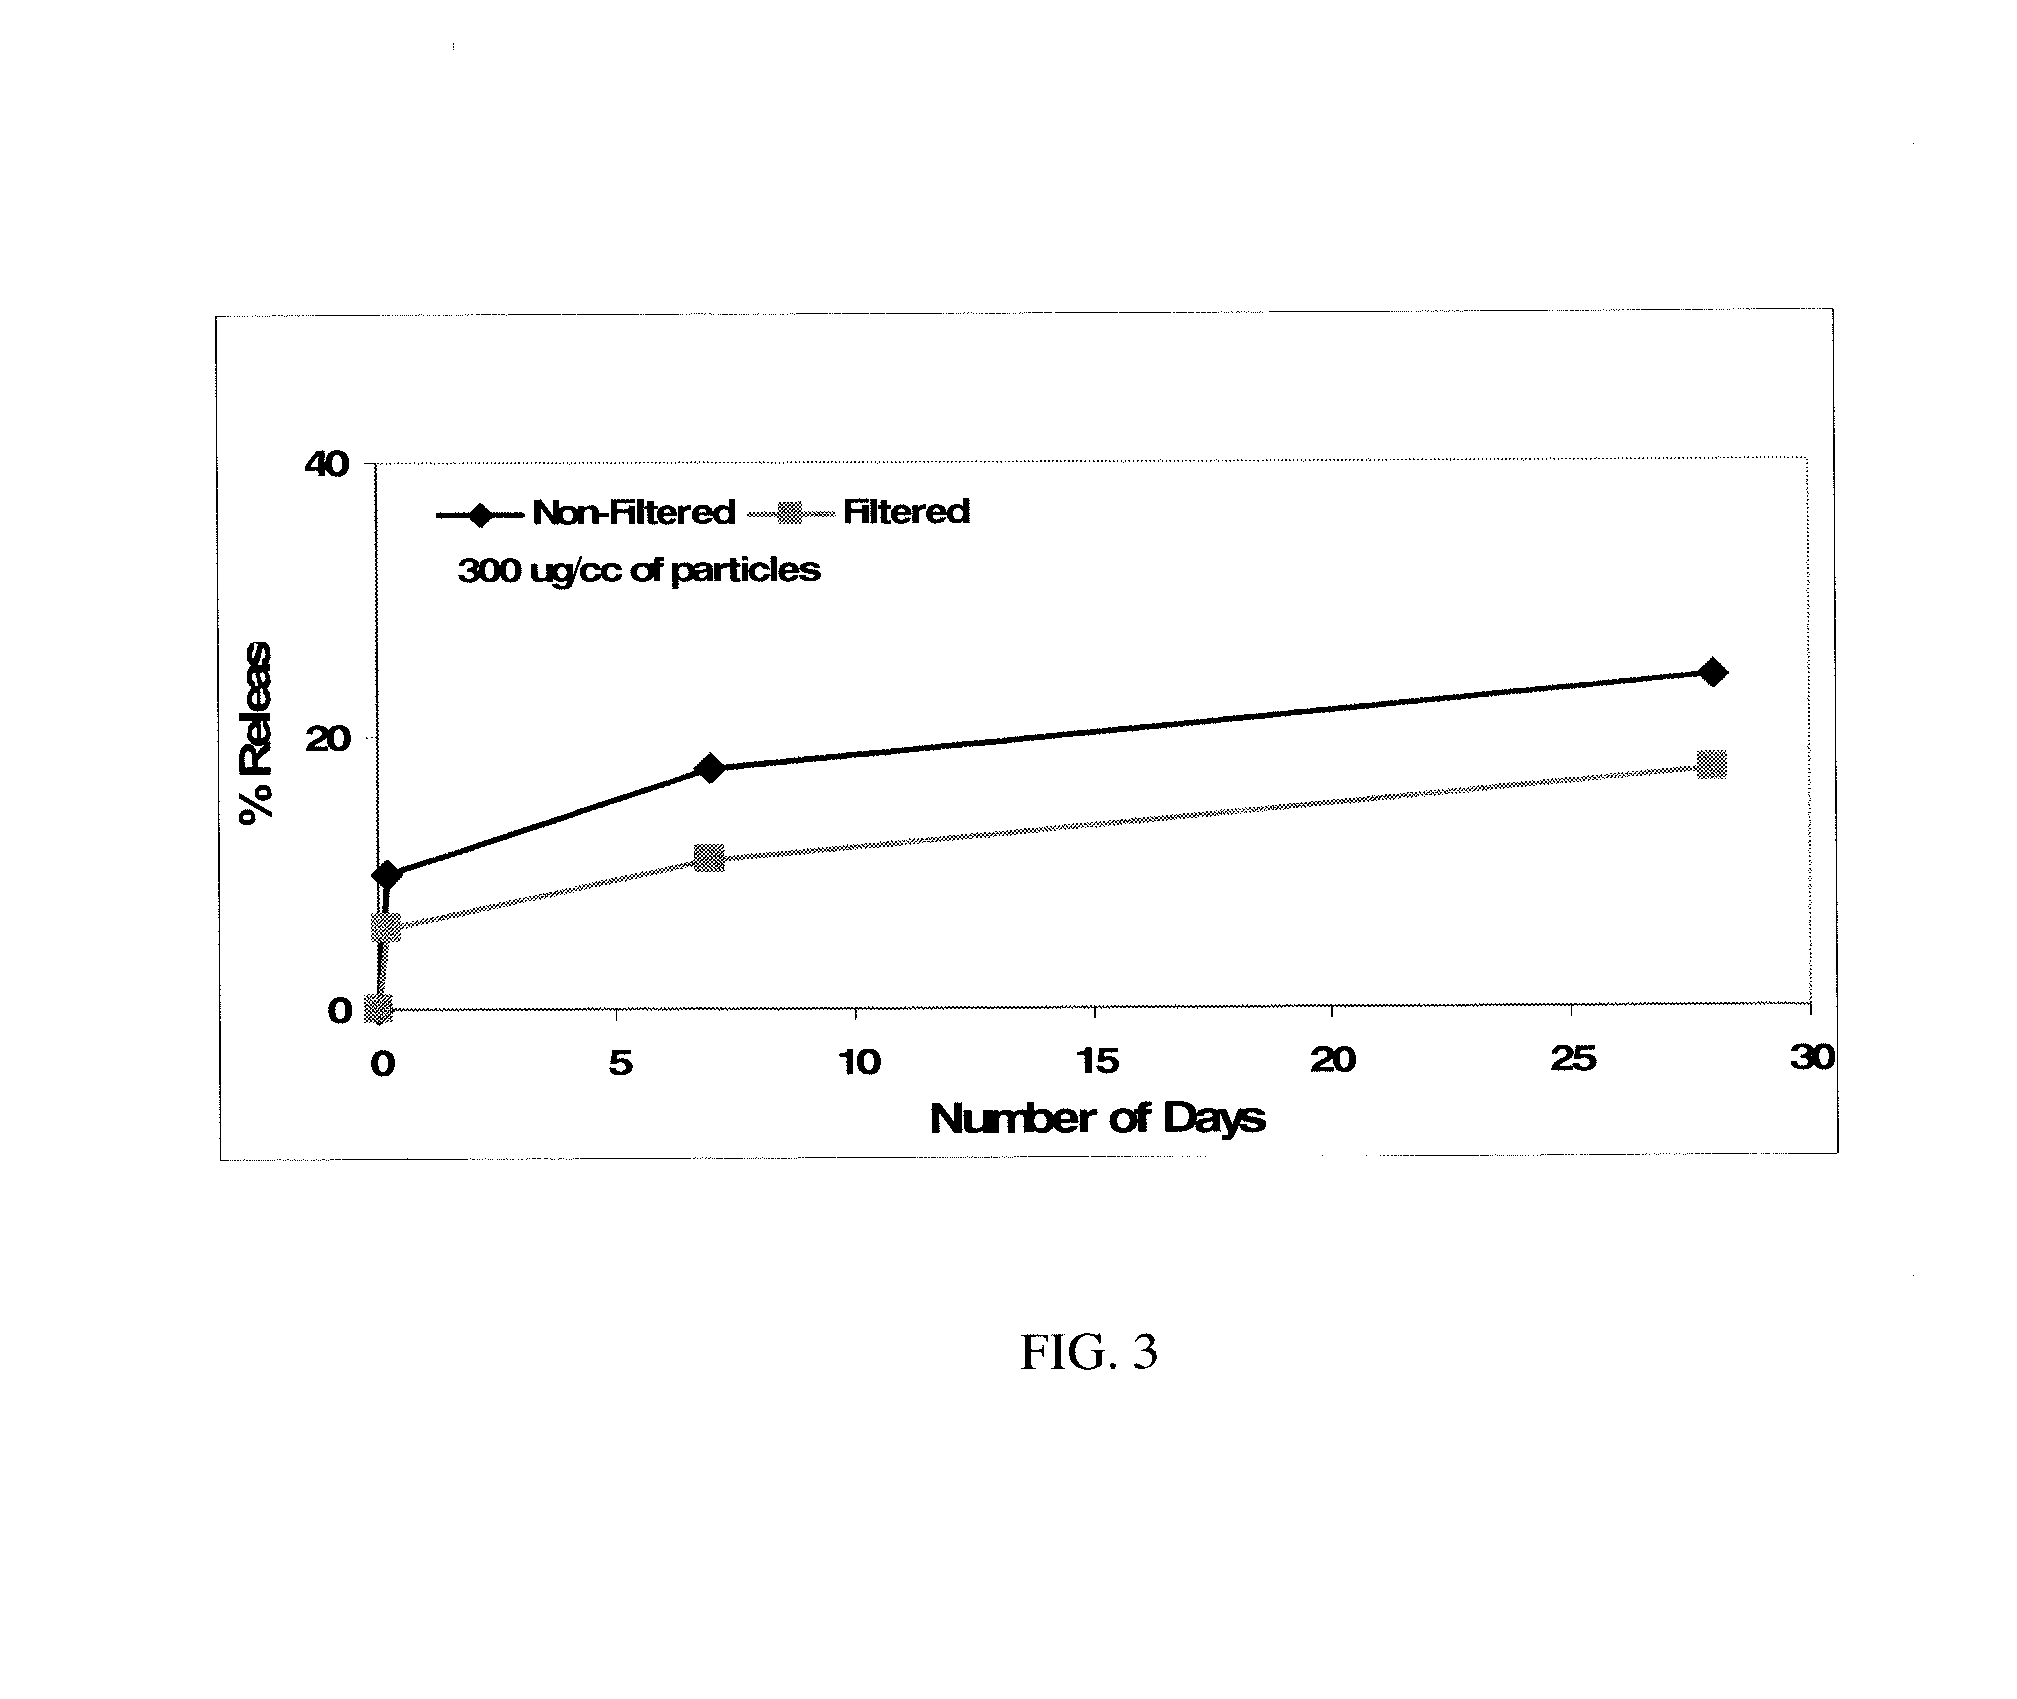 Composition and Method for Delivery of BMP-2 Amplifier/Co-Activator for Enhancement of Osteogenesis